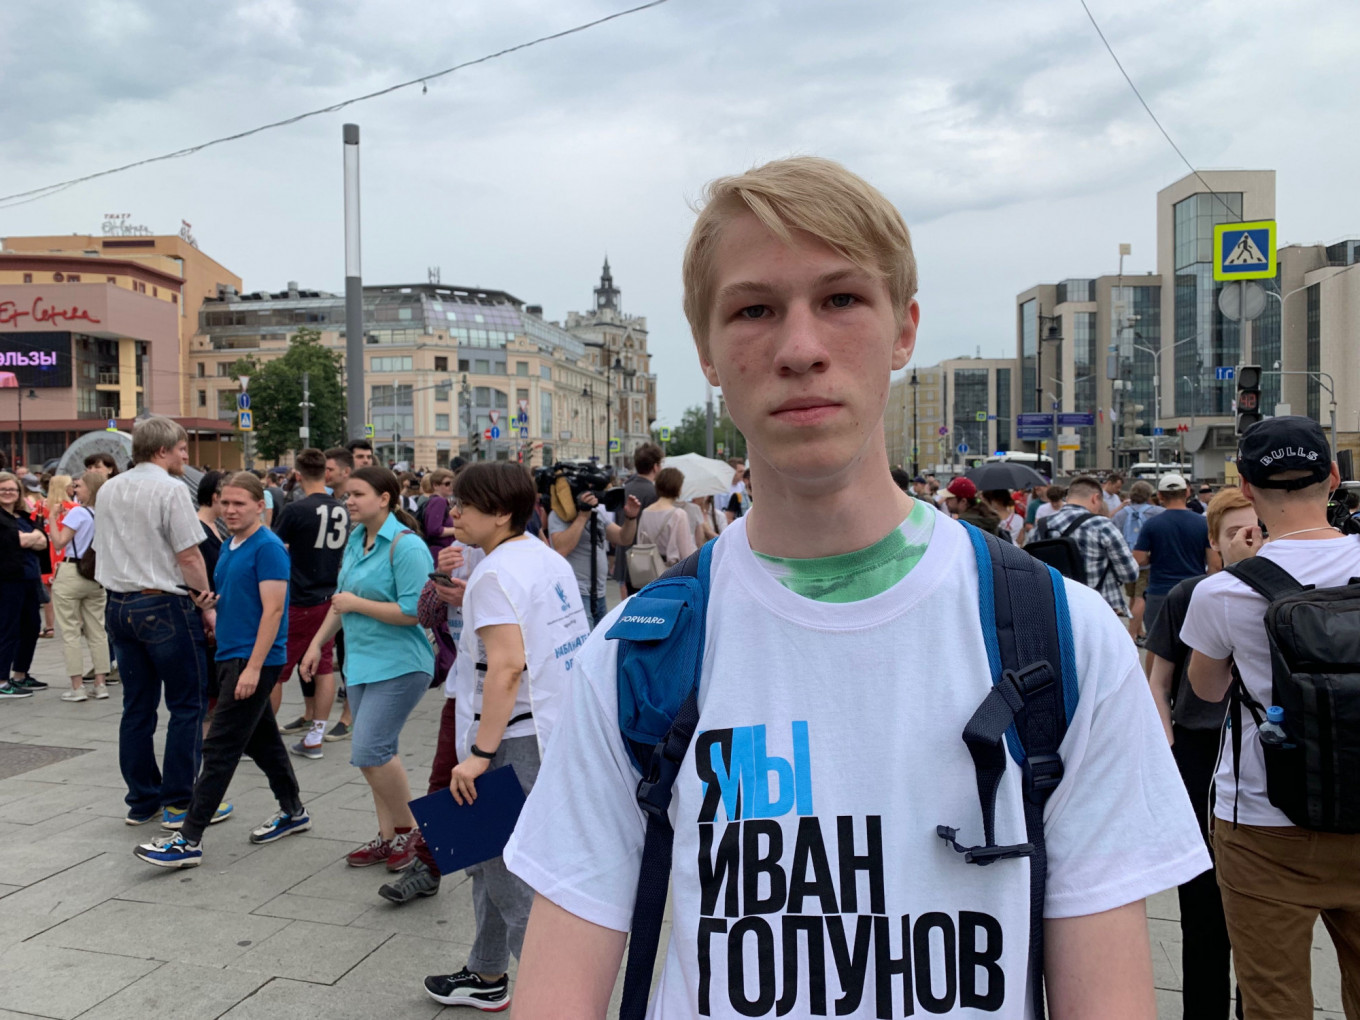 Police Detain Over 400 in Moscow During Protest Over Reporter’s Arrest